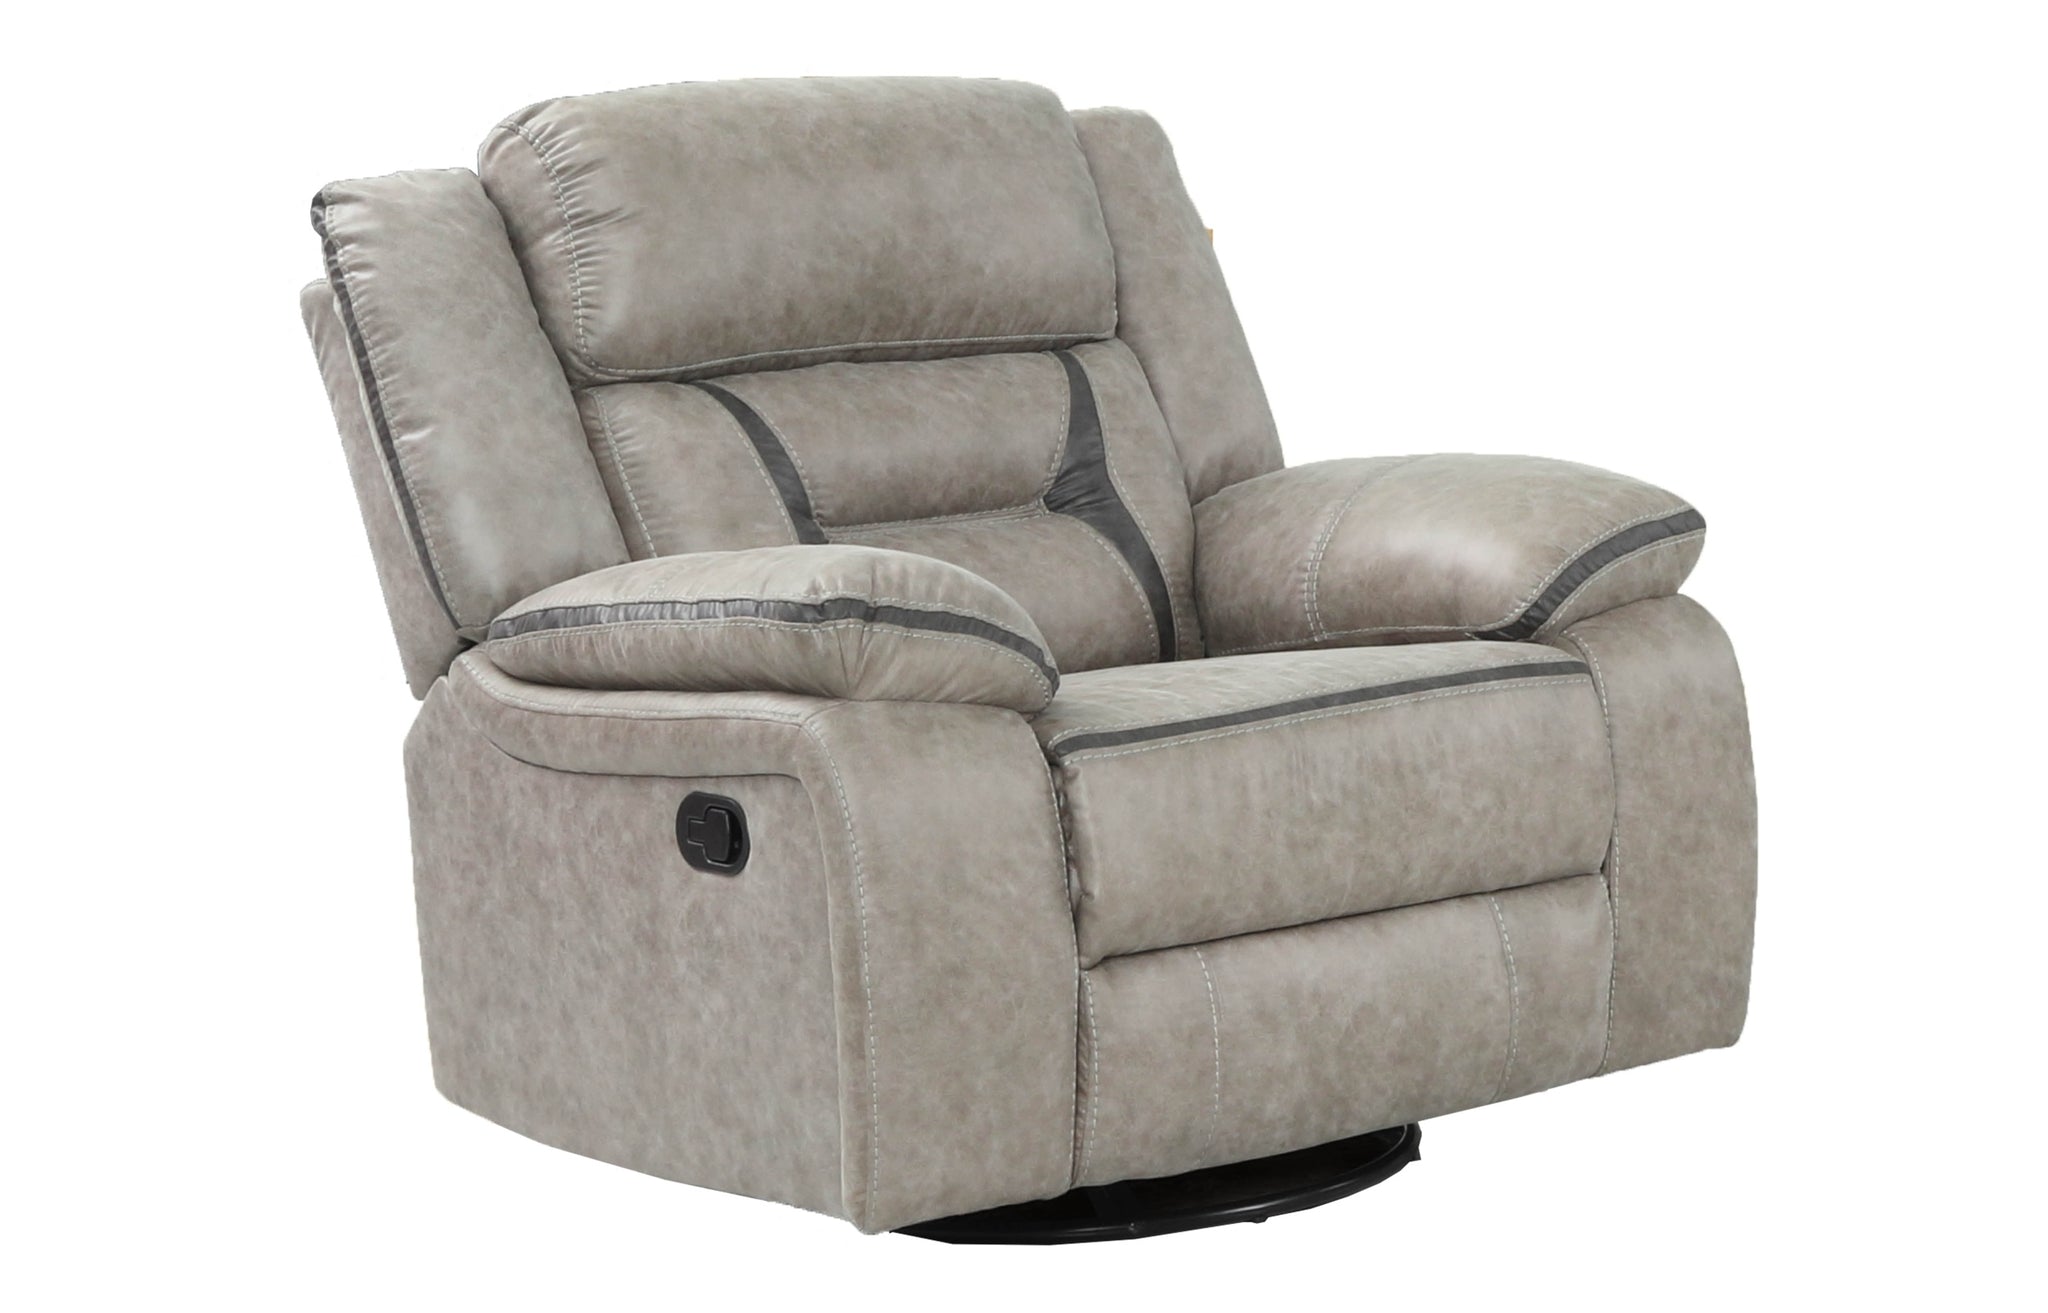 Denali Faux Leather Upholstered Chair Made With